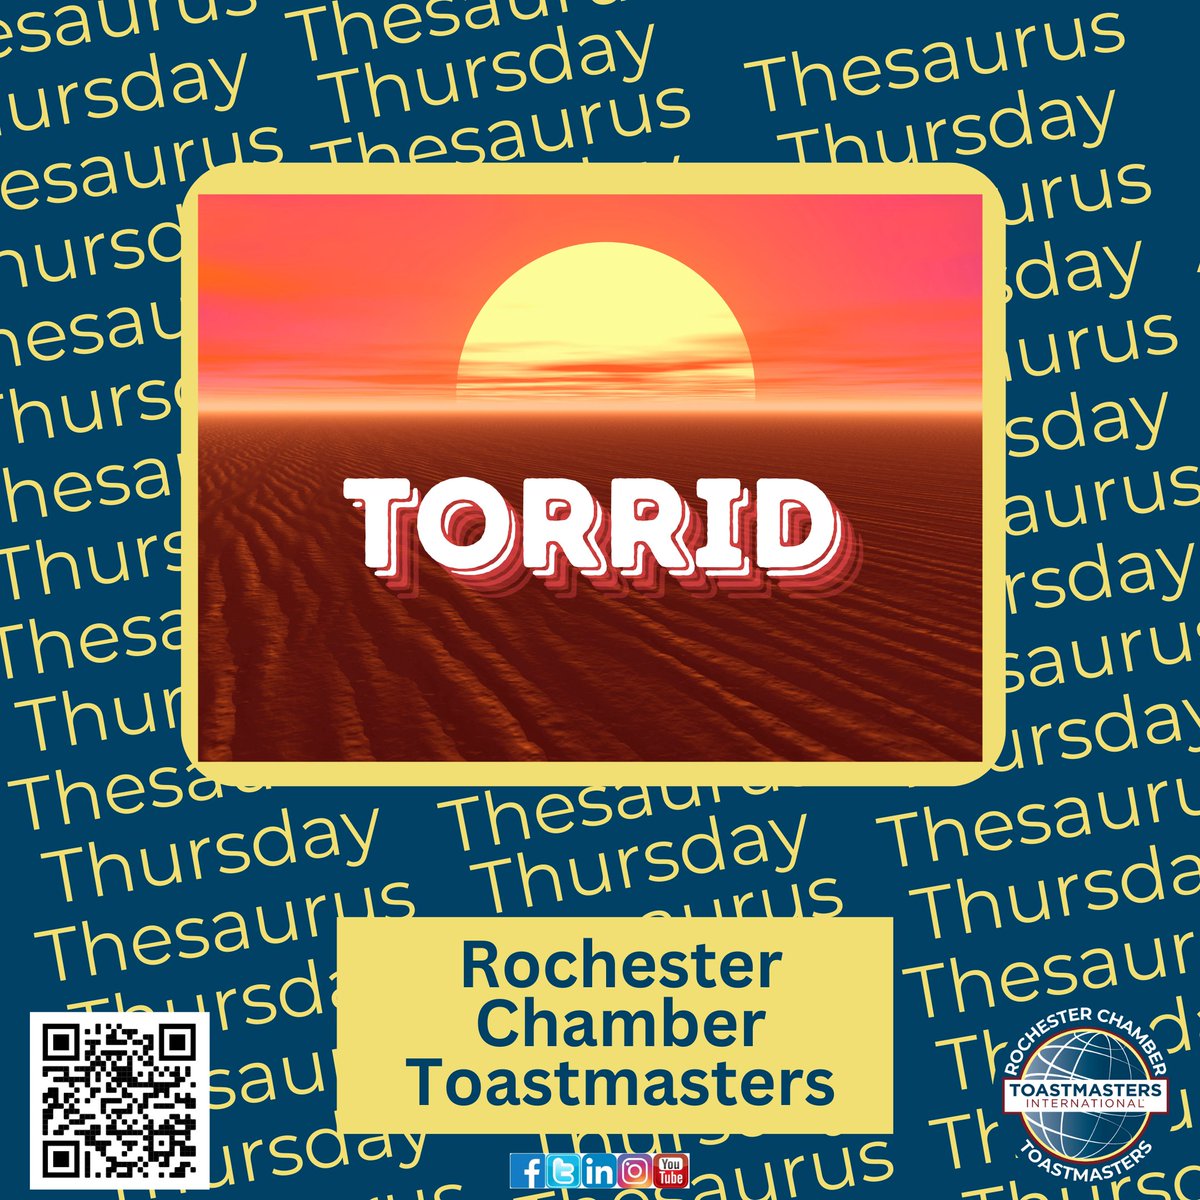 Thesaurus Thursday - Enjoy the gentle warmth of spring before the “Torrid” days of summer arrive (def) oppressively hot, parching, or burning, ardent; passionate #toastmasters #rochmn  #mn #rochester_mn #publicspeaking  #neighborshare #neighborstory #wordofday #torrid